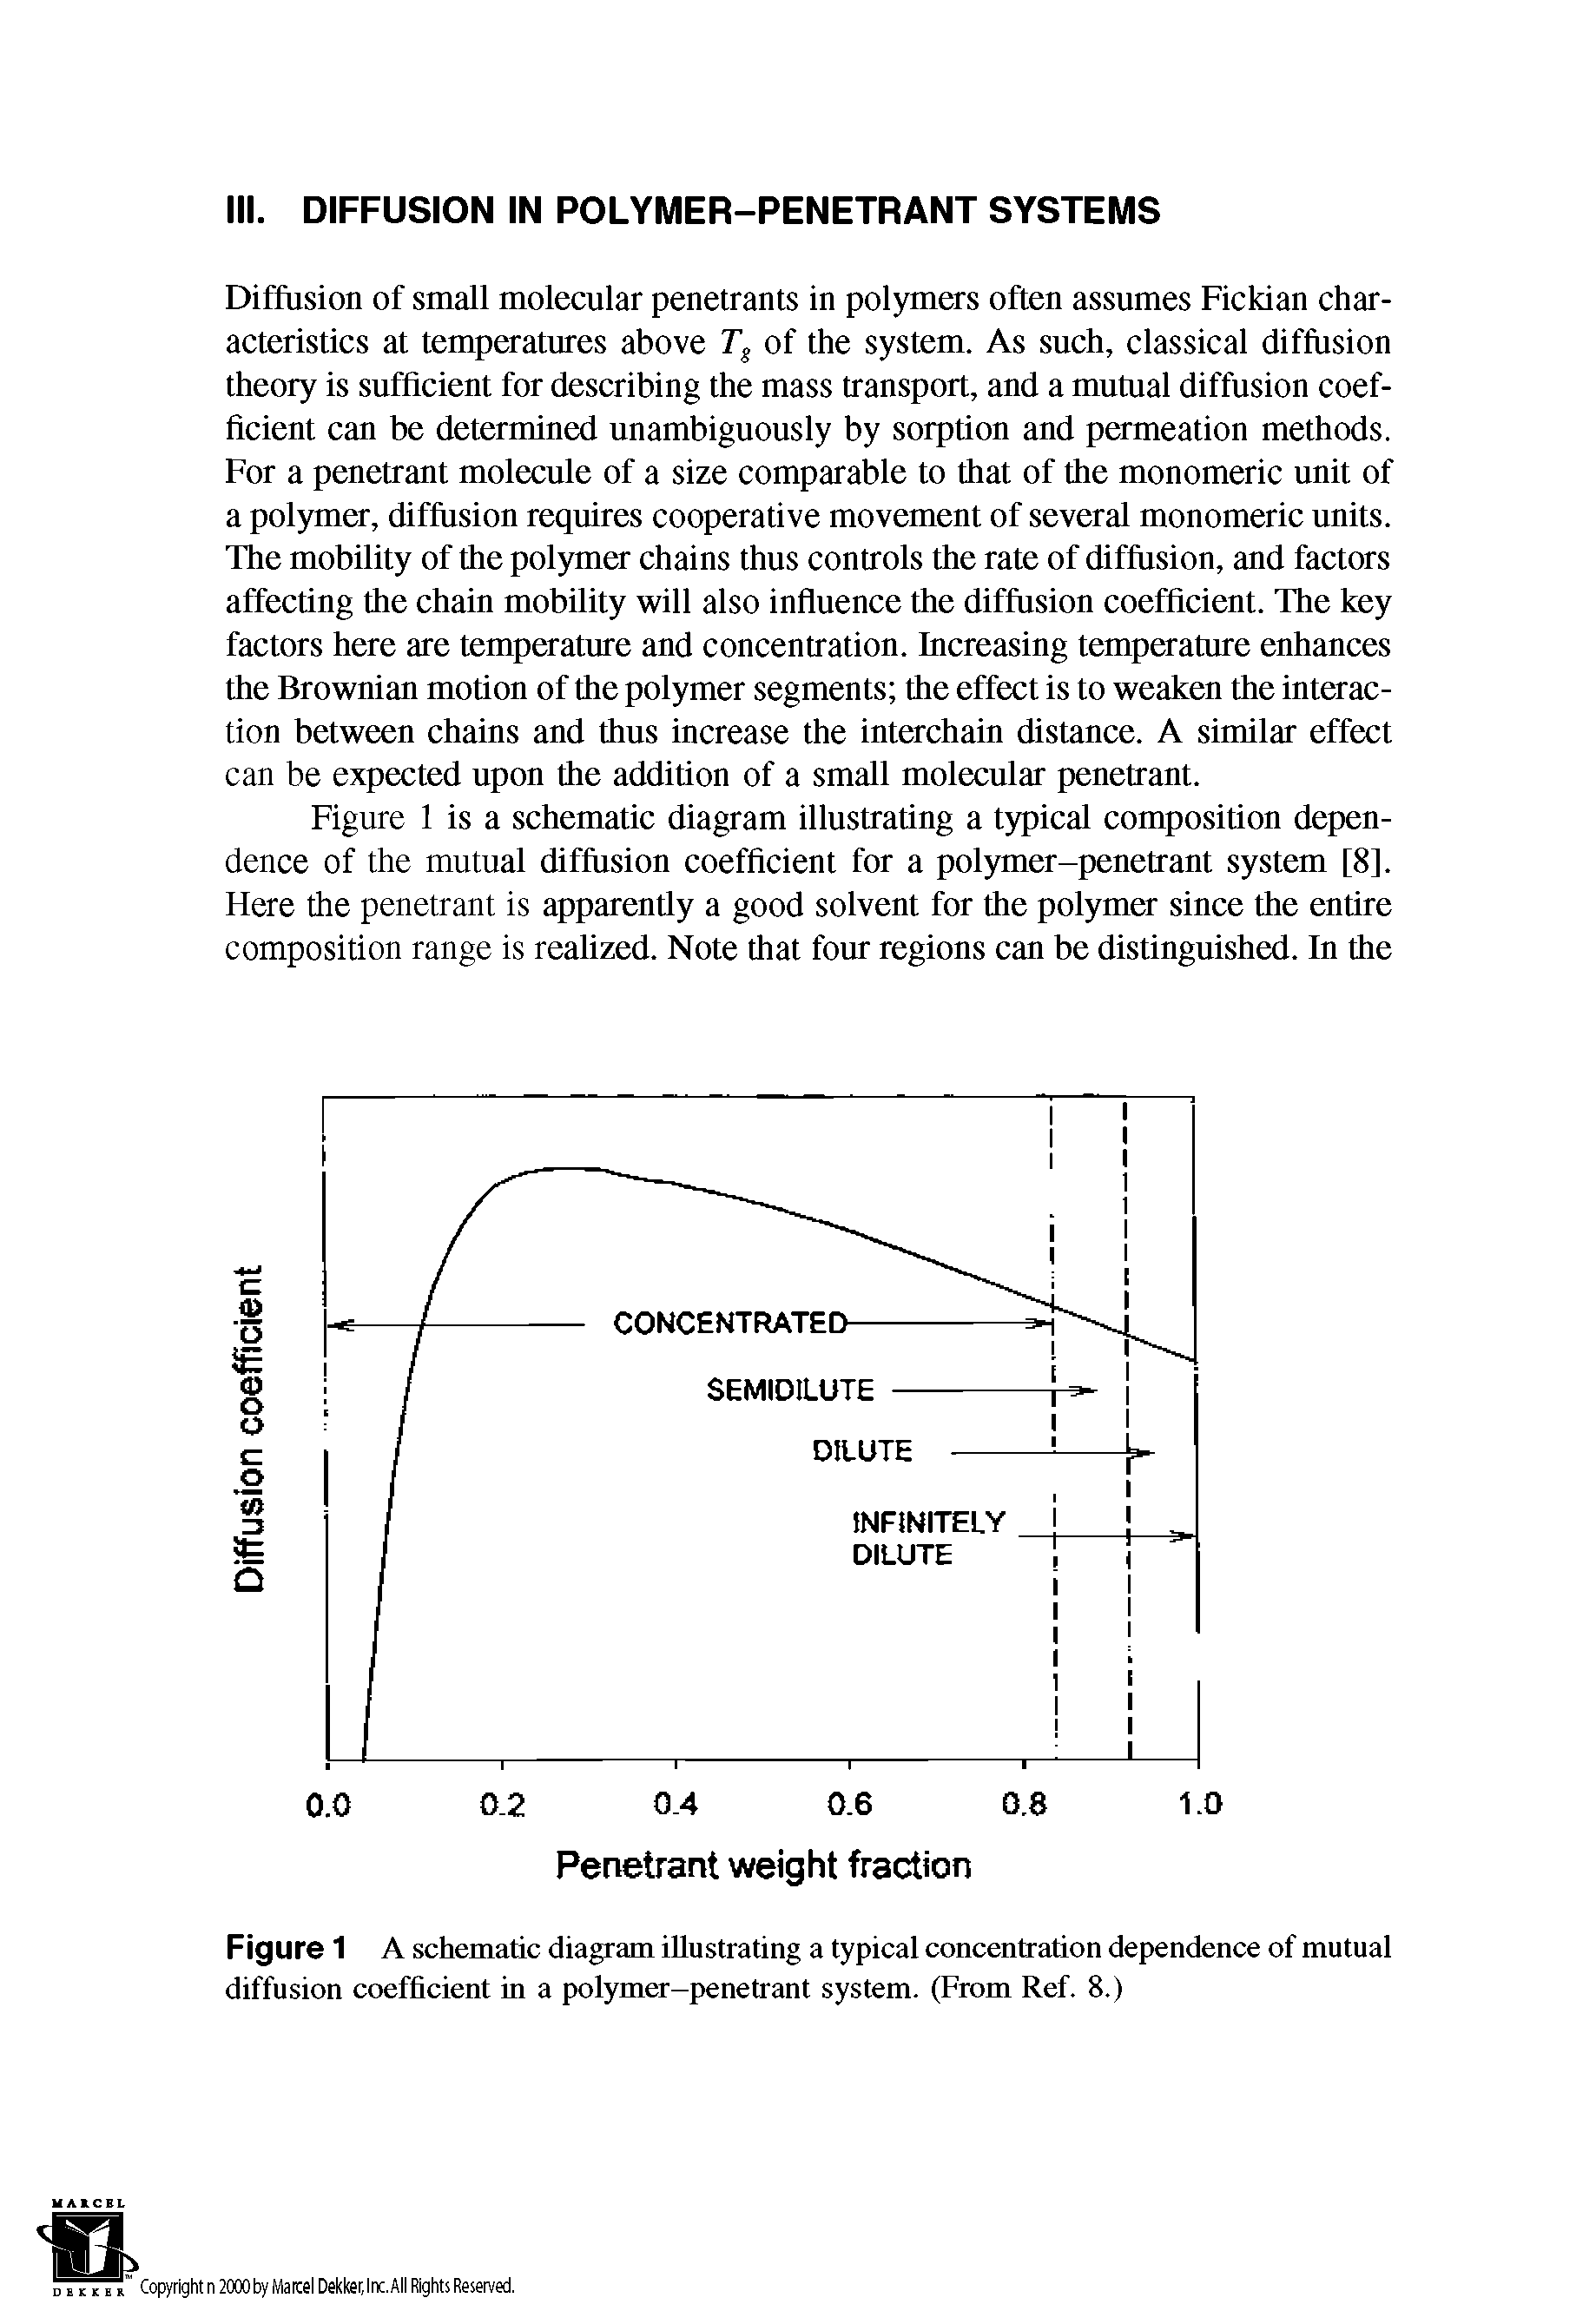 Figure 1 A schematic diagram illustrating a typical concentration dependence of mutual diffusion coefficient in a polymer-penetrant system. (From Ref. 8.)...